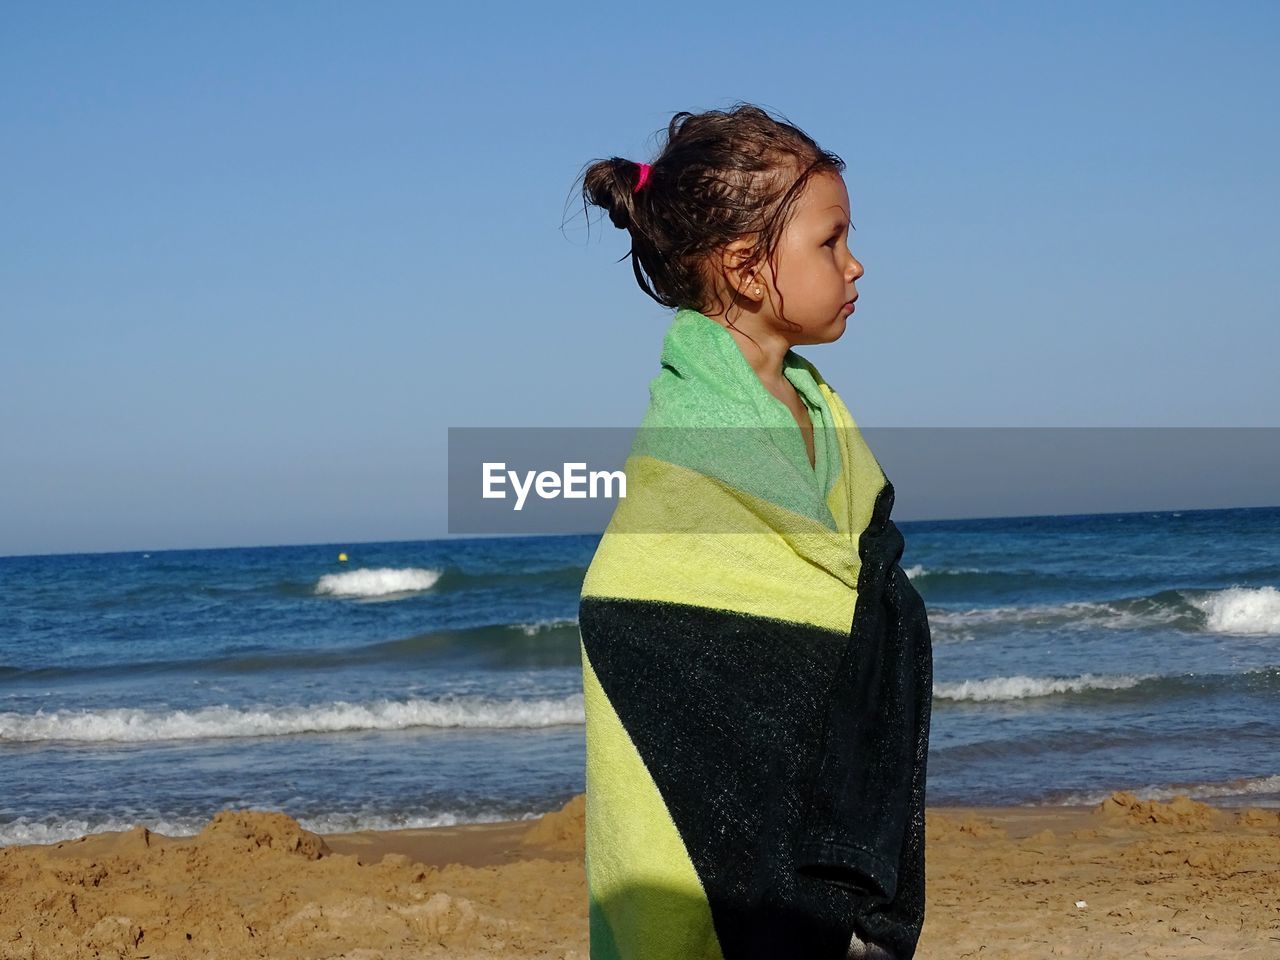 Cute girl wrapped in towel looking away while standing at beach against clear sky